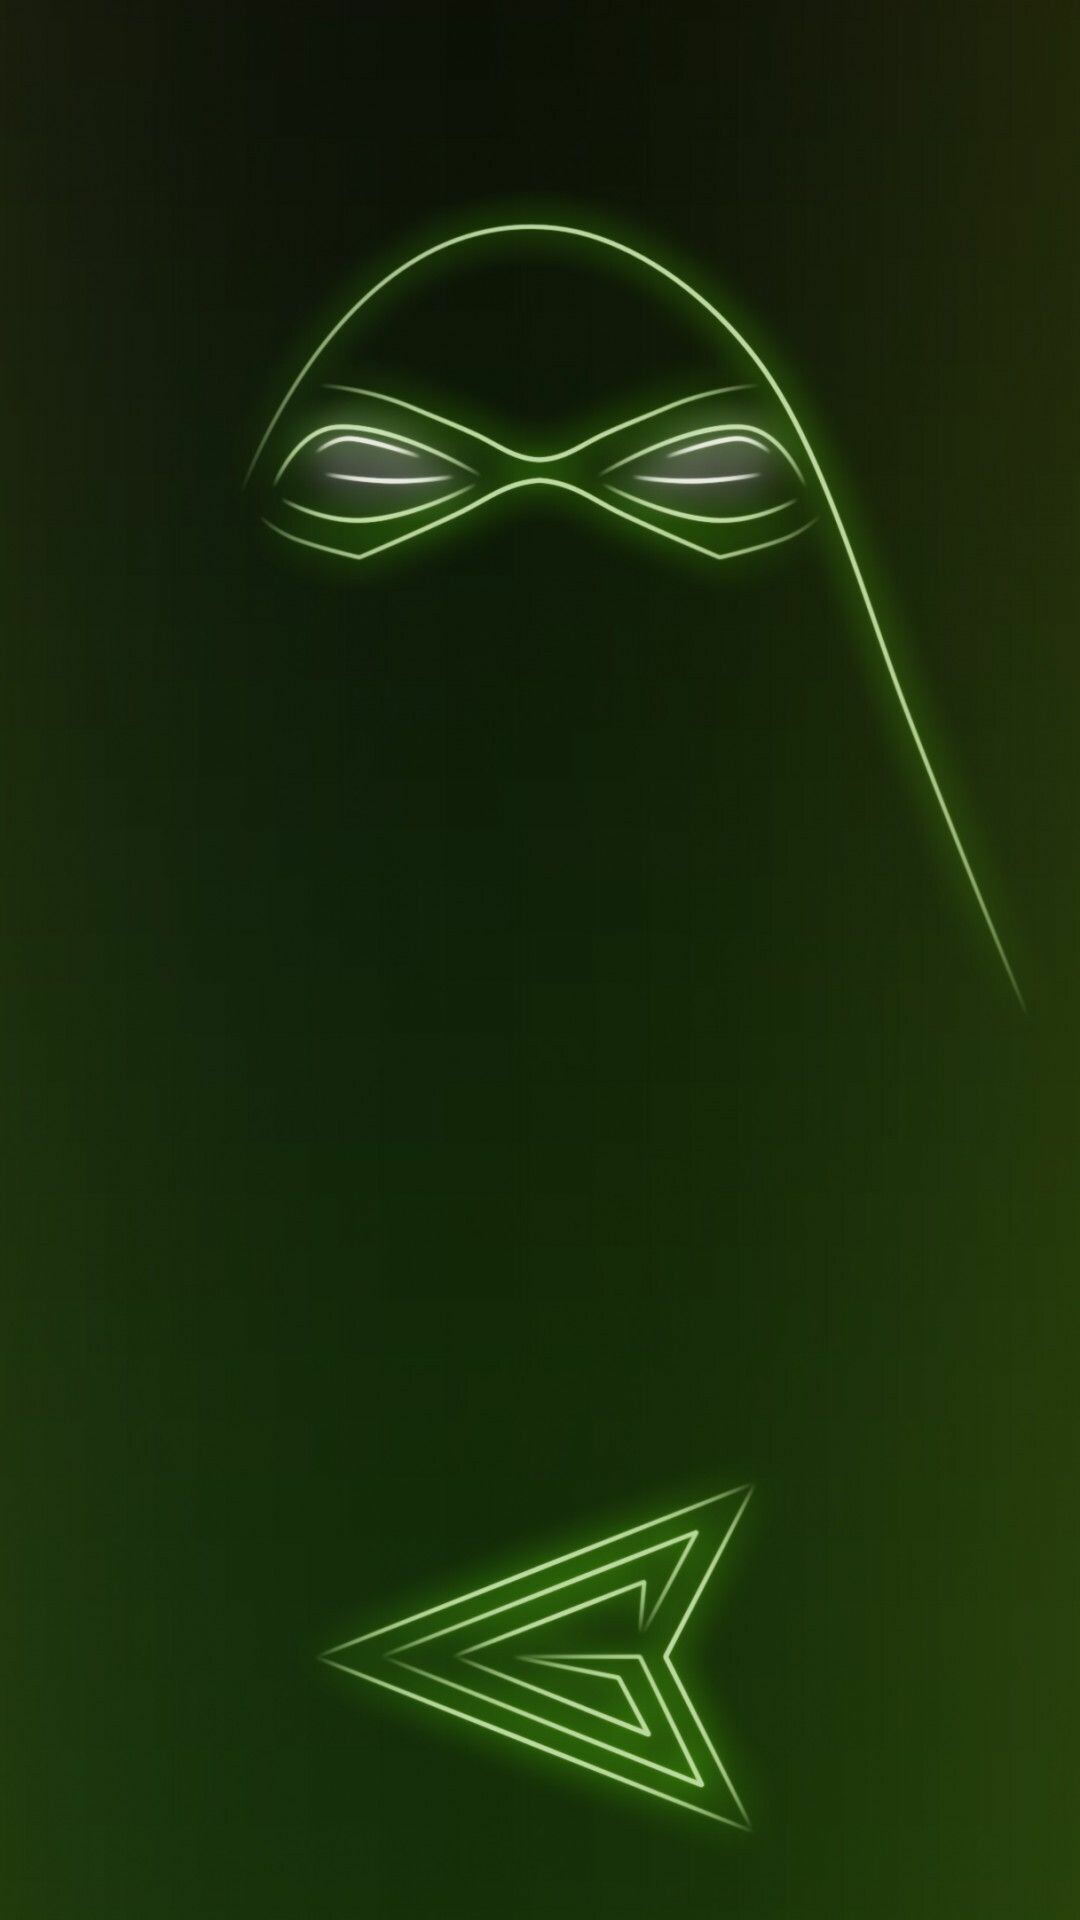 Green Arrow: An archer who uses his skills to fight crime, Symbol. 1080x1920 Full HD Wallpaper.